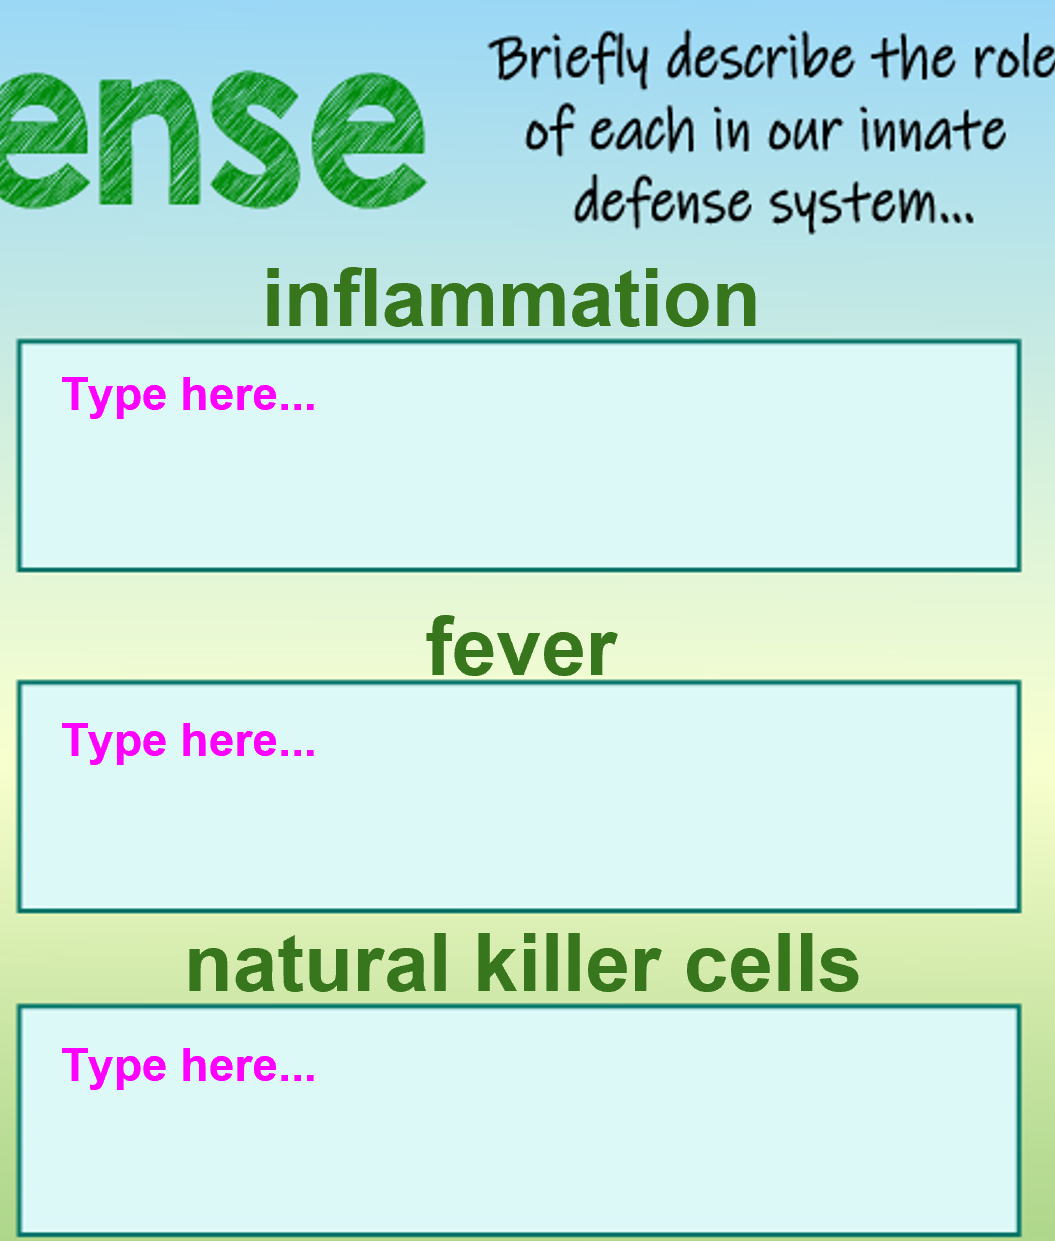 ense
Briefly describe the role
of each in our innate
defense system.
inflammation
Type here...
fever
Турe here...
natural killer cells
Type here...
